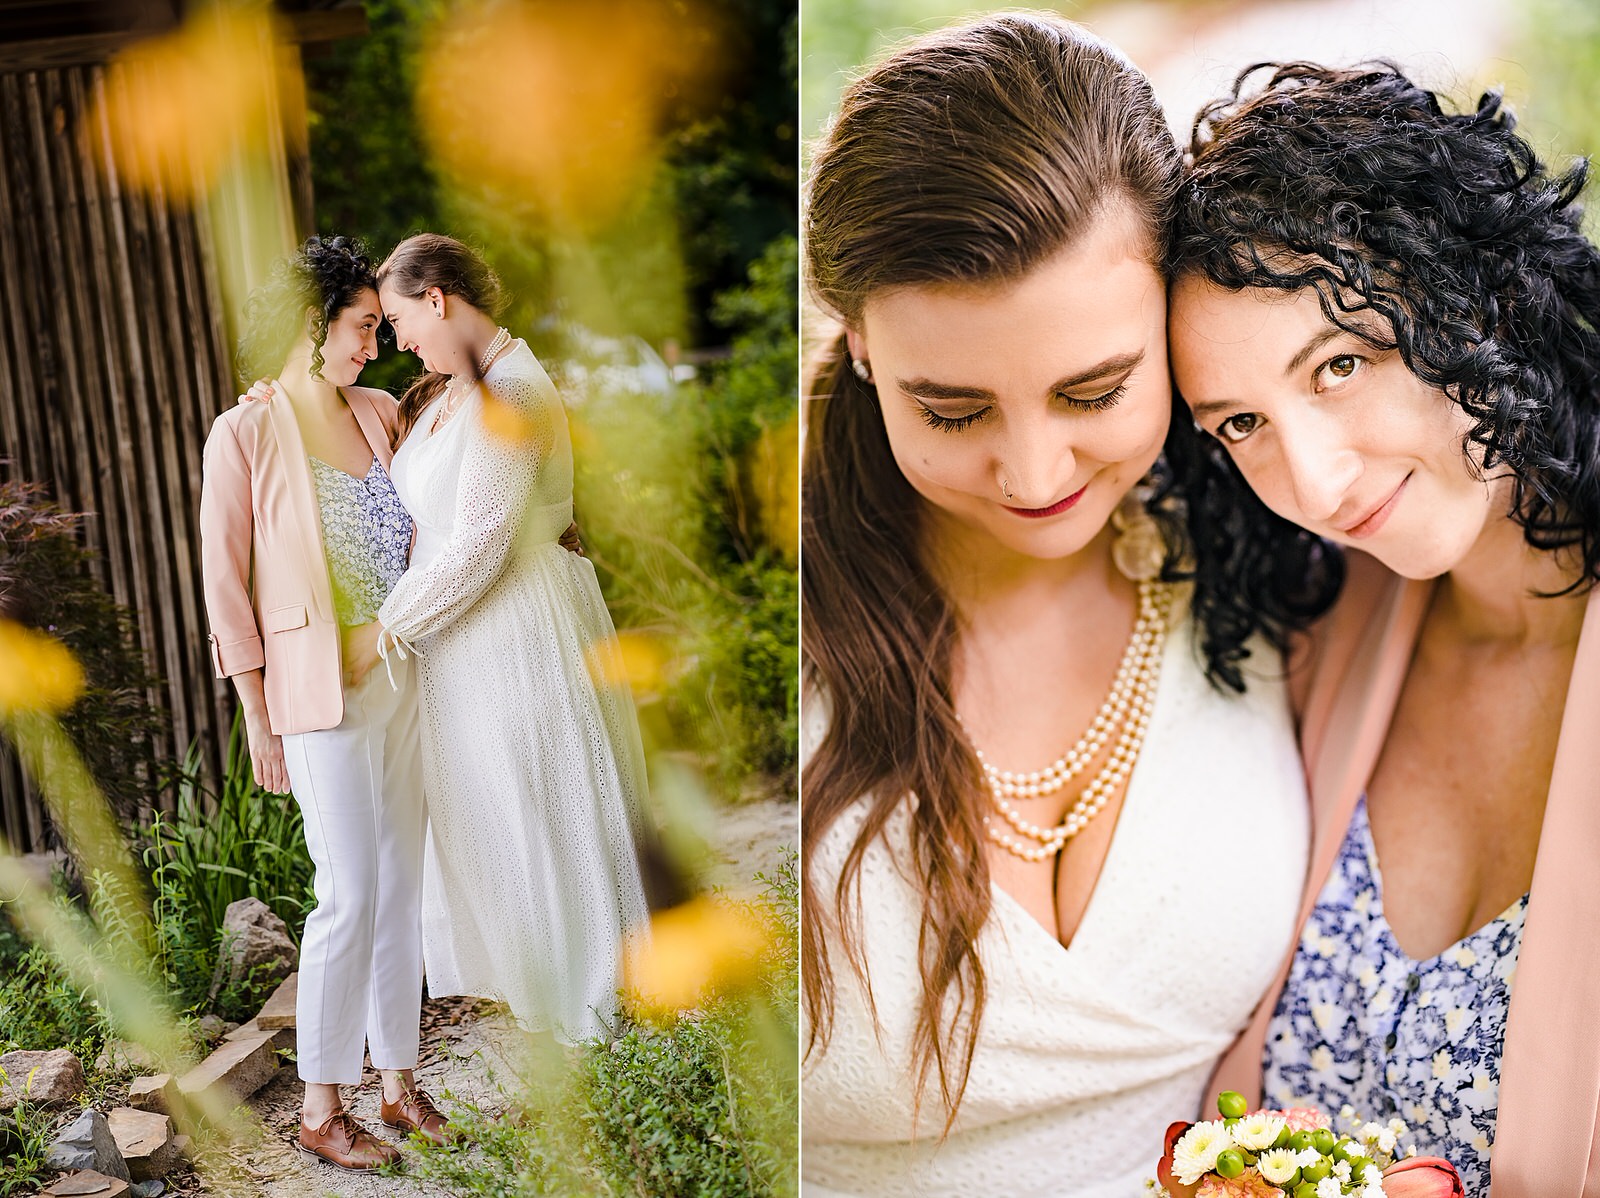 At a same-sex elopement, two brides hug one another